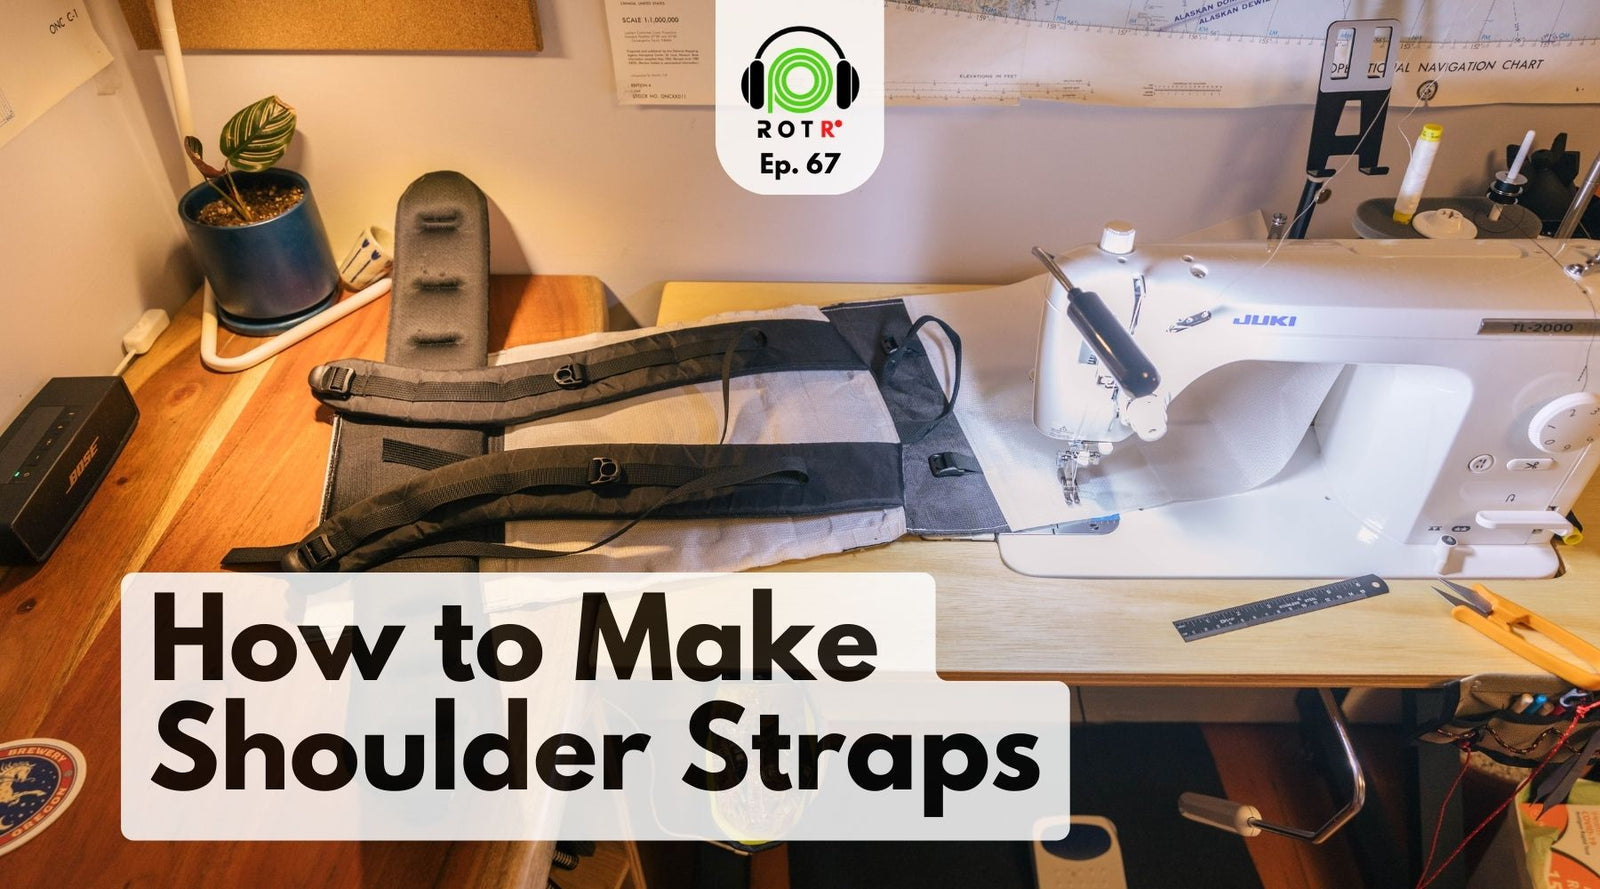 How to make custom padded shoulder straps / sewing tutorial 